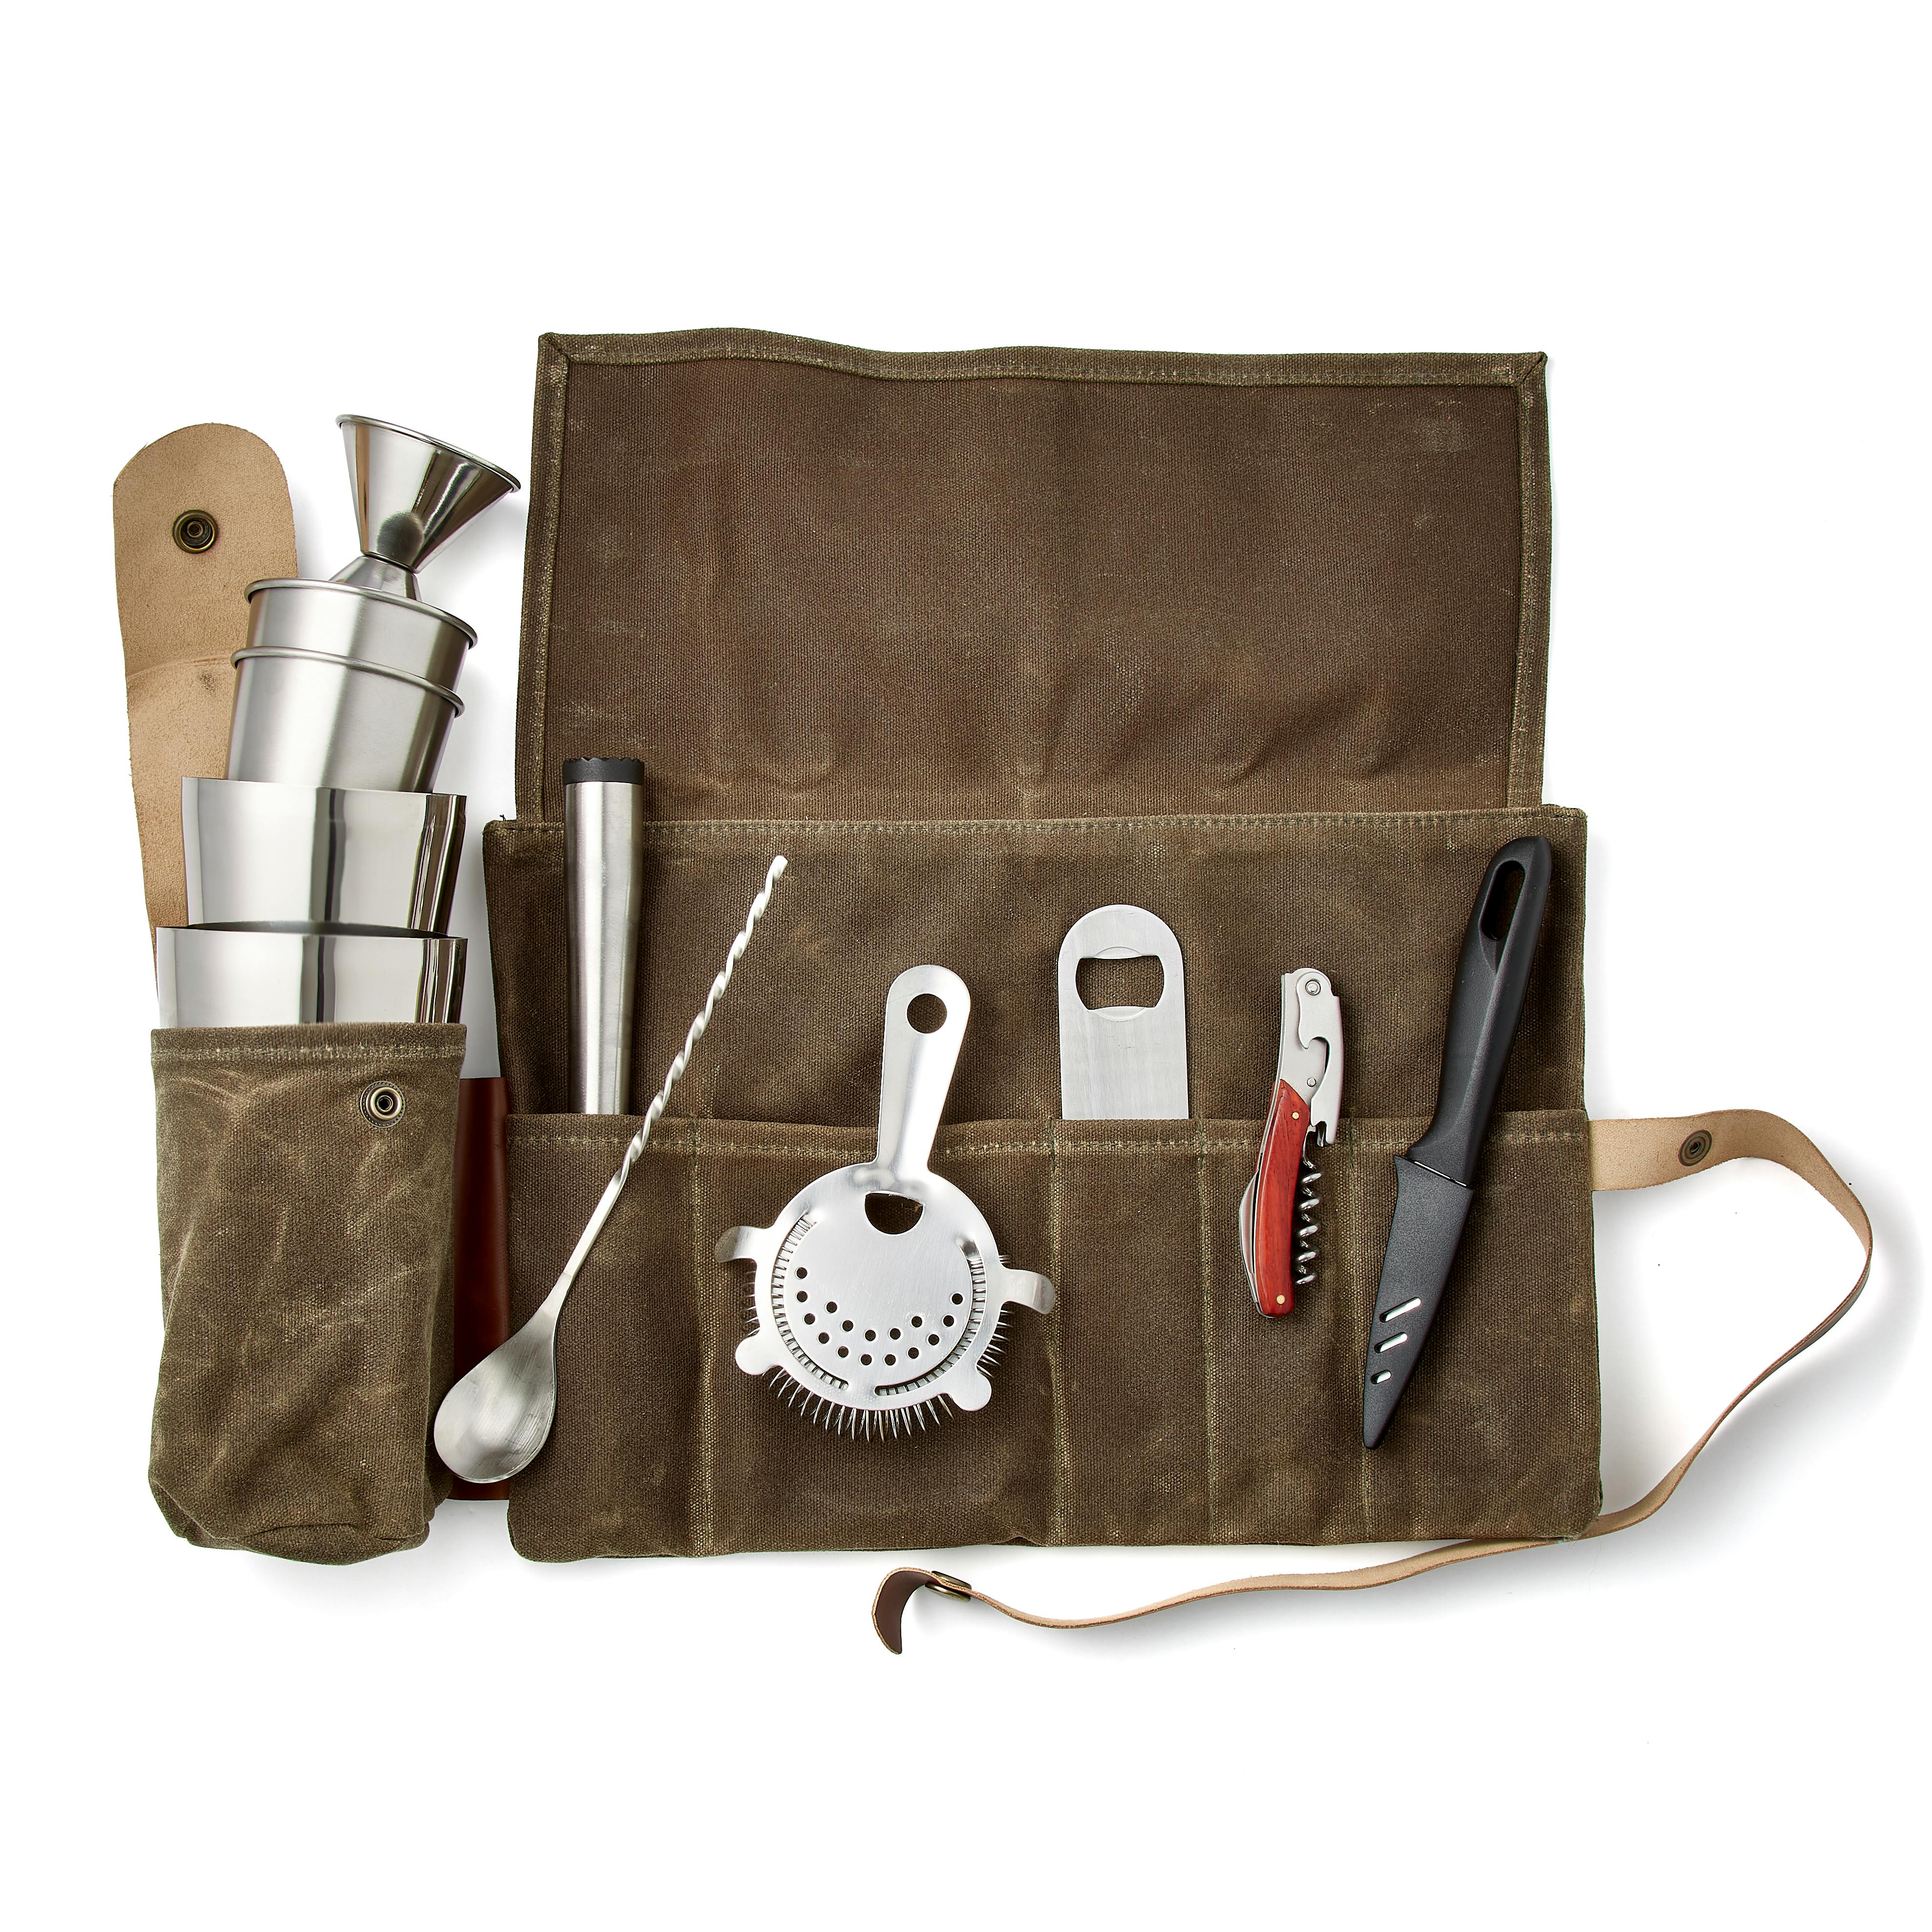 The Traveling Mixologist - Portable Cocktail Kit